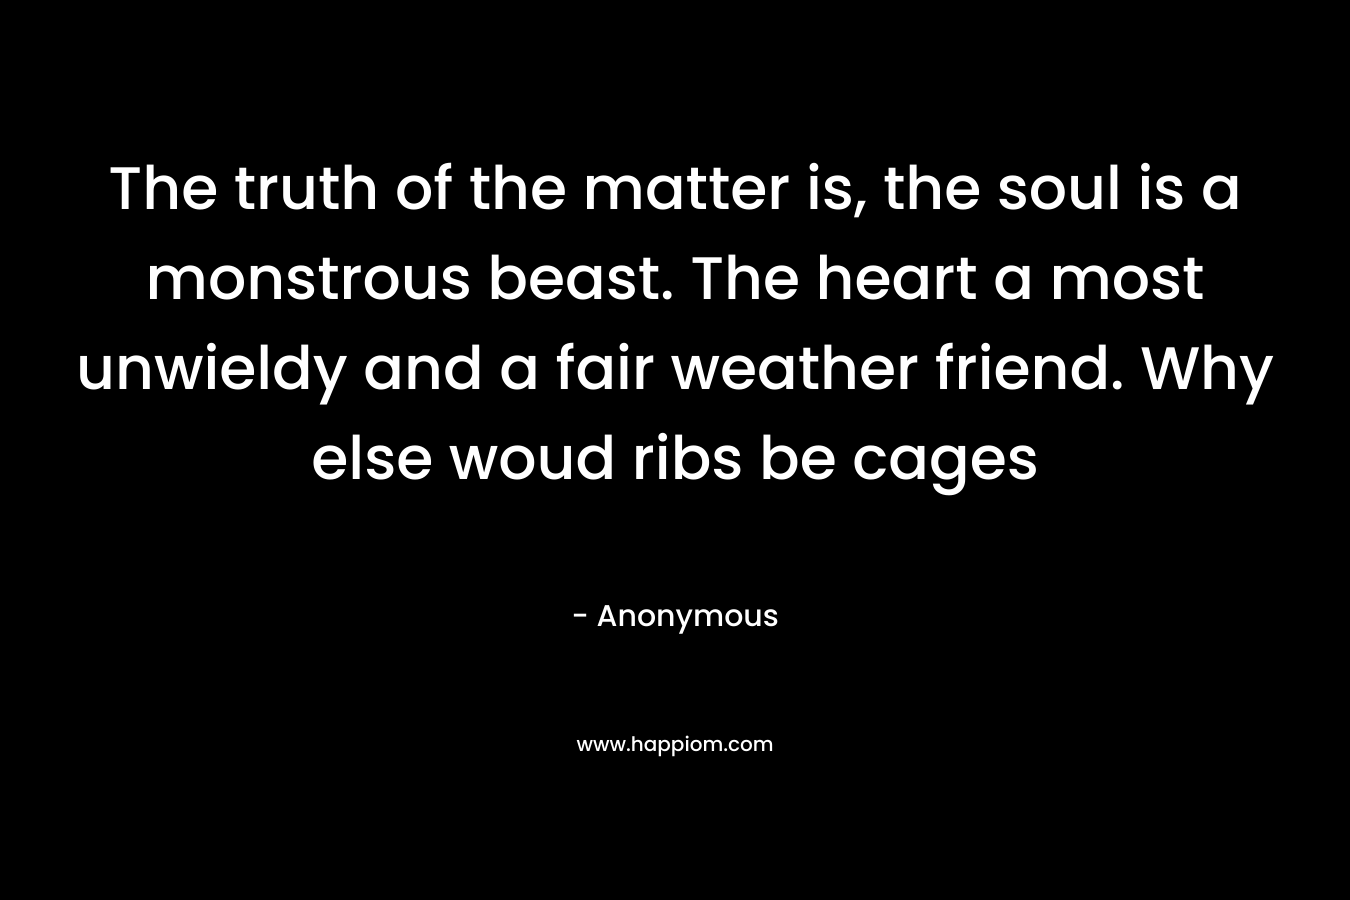 The truth of the matter is, the soul is a monstrous beast. The heart a most unwieldy and a fair weather friend. Why else woud ribs be cages